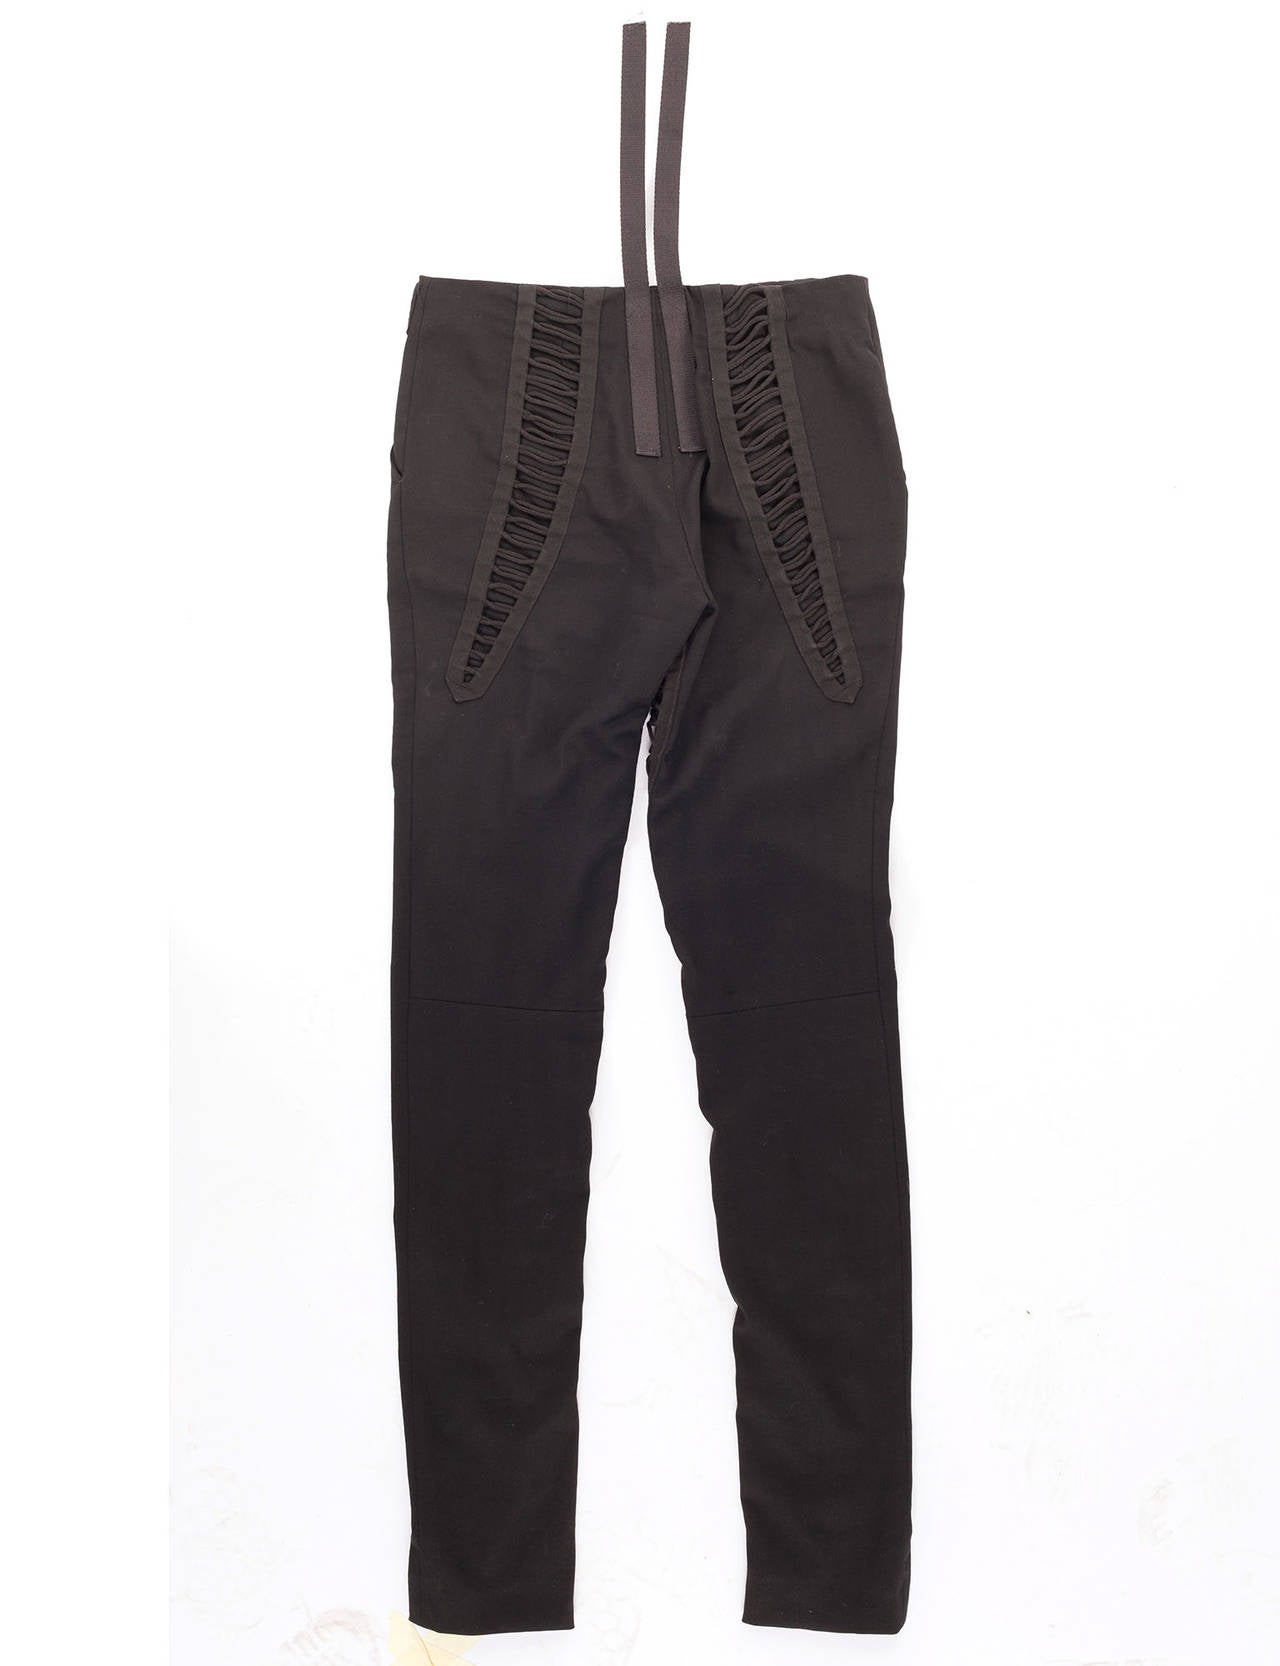 The now iconic Helmut Lang black bondage pants with multi straps, multi details in black stretch wool. What an amazing piece of fashion history.